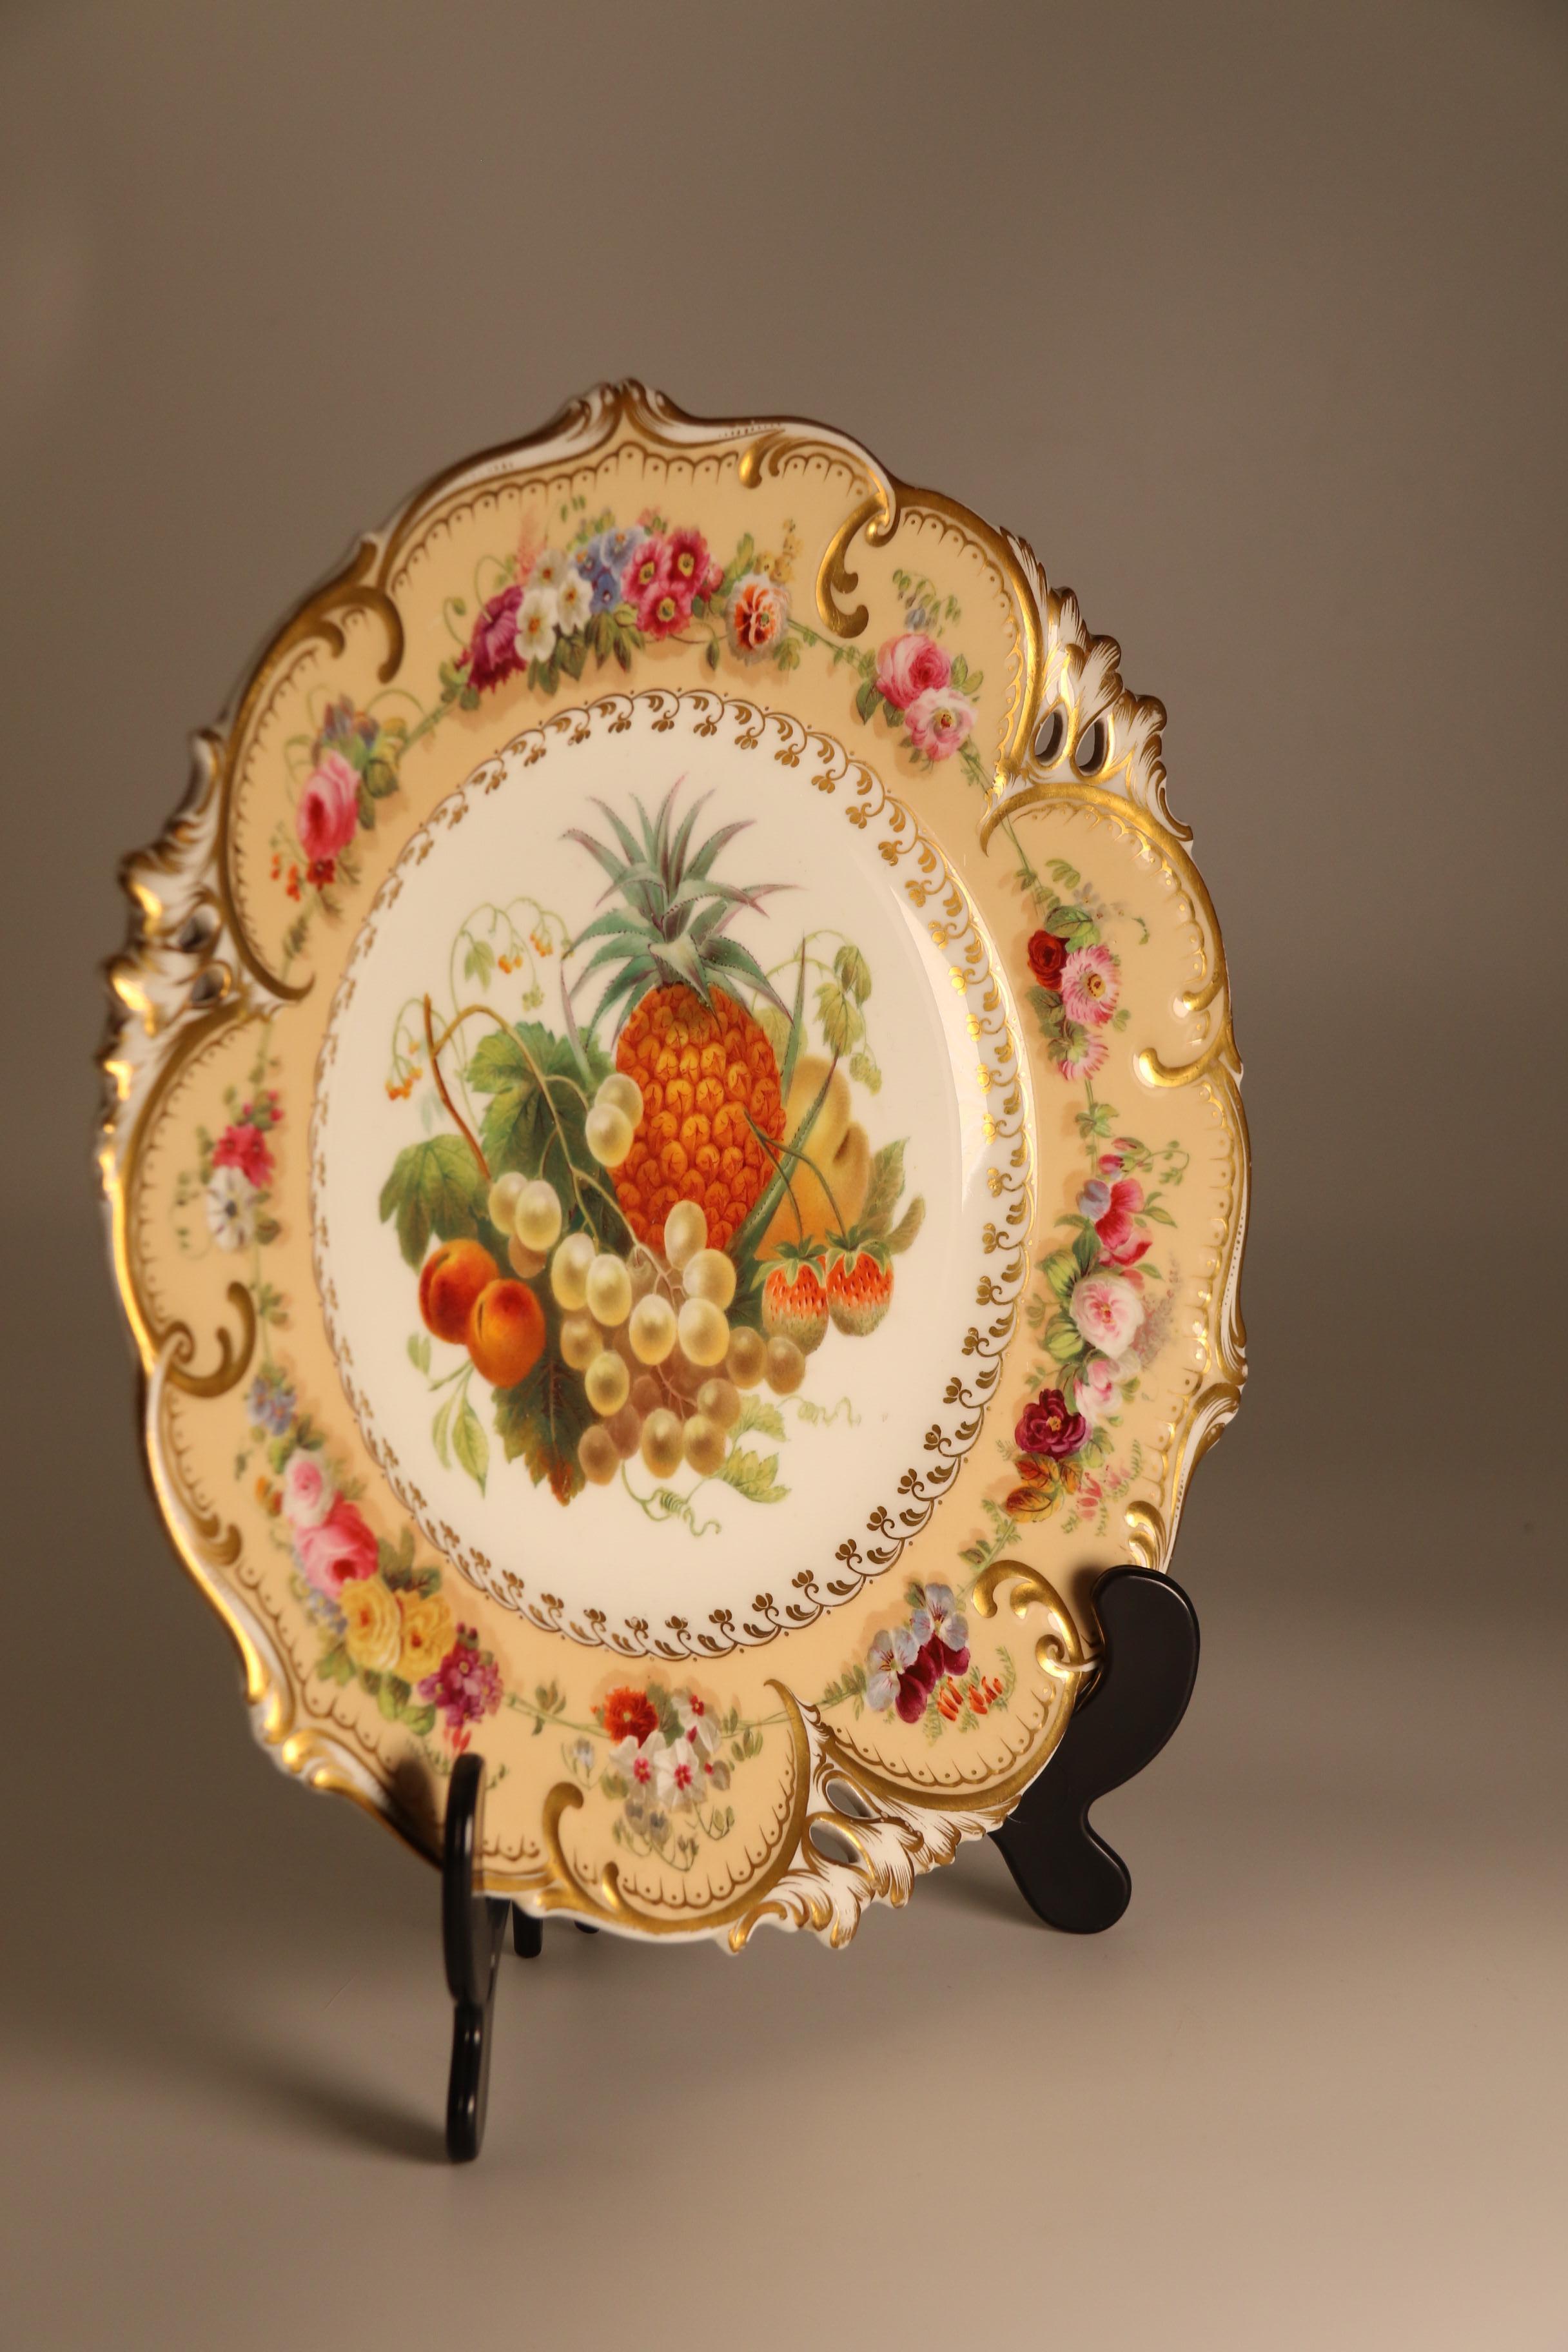 This superb early 19th century porcelain cabinet plate is very finely hand painted with a rich central display of exotic fruit and foliage over a white ground boardered with a delicate gilded floral pattern. The shaped and pierced surround has a